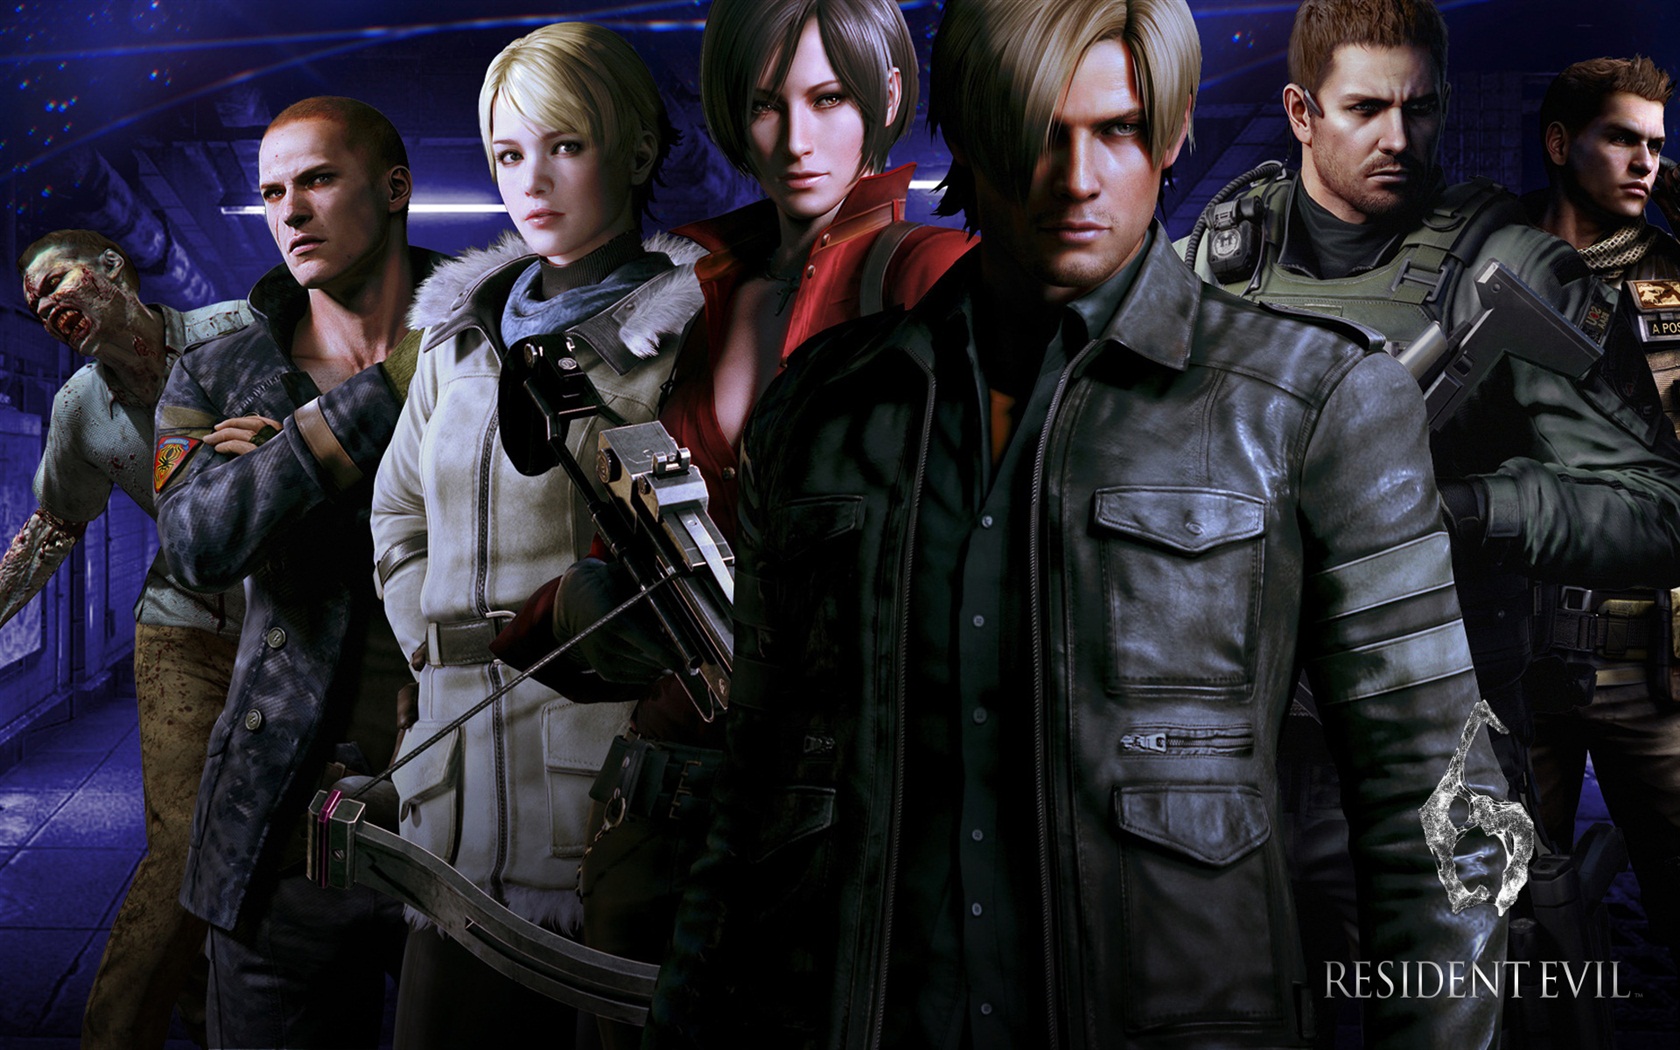 Resident Evil 6 HD game wallpapers #10 - 1680x1050